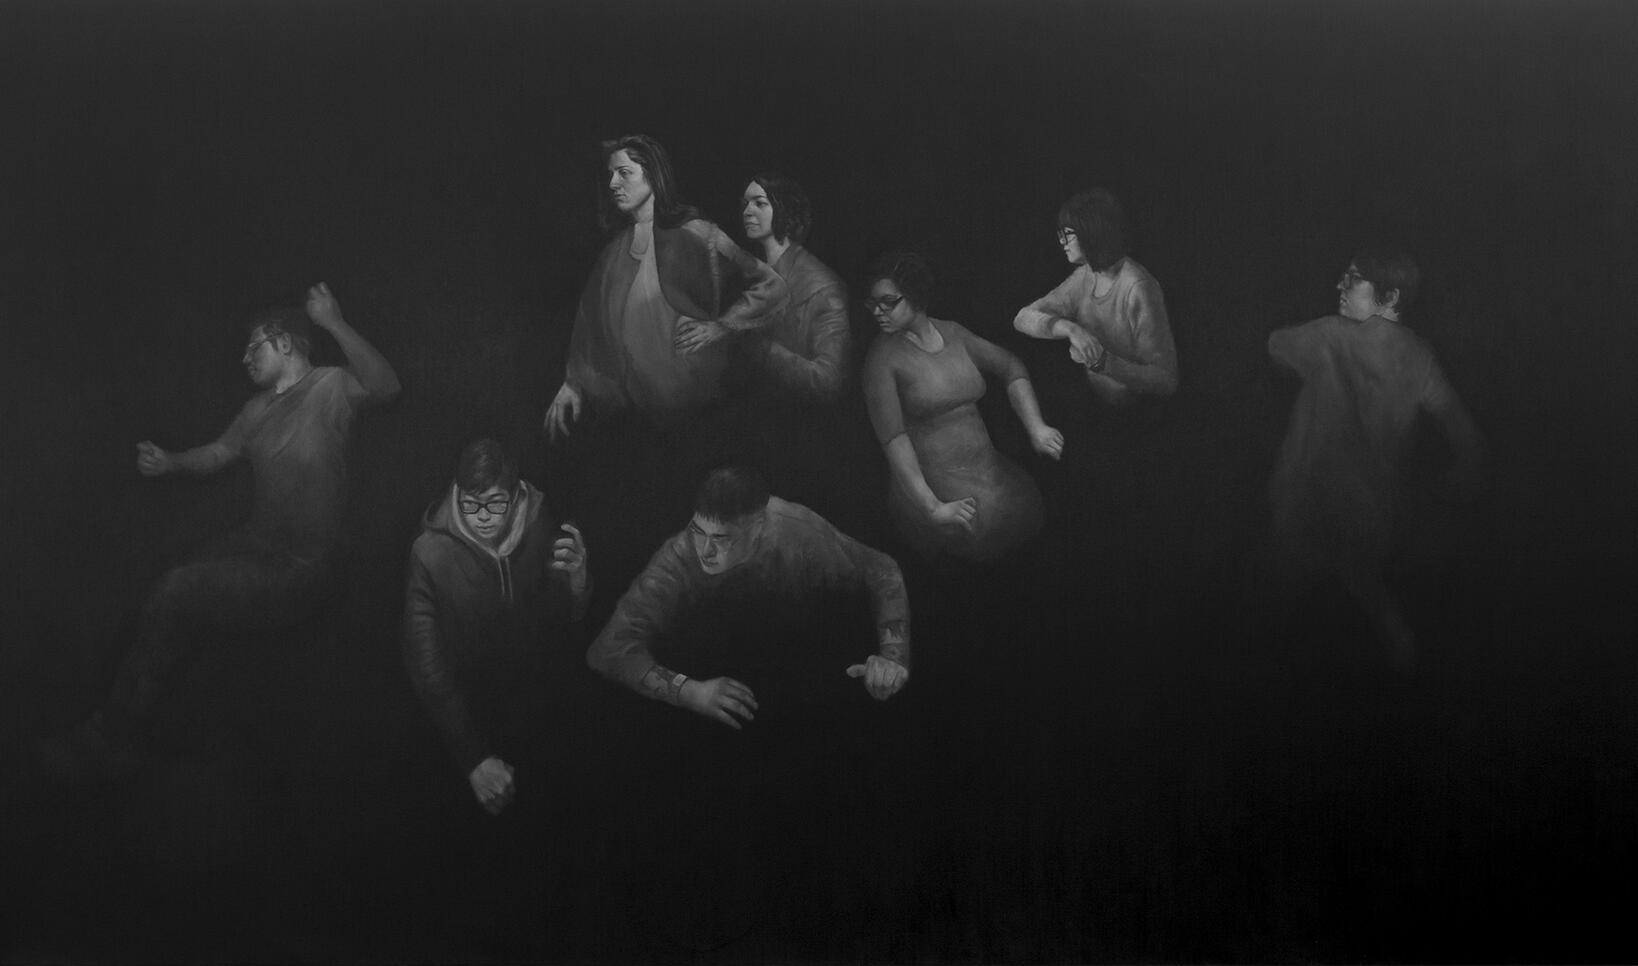 Oil on canvas painting of immigrants in the dark ; Jonathan Aller